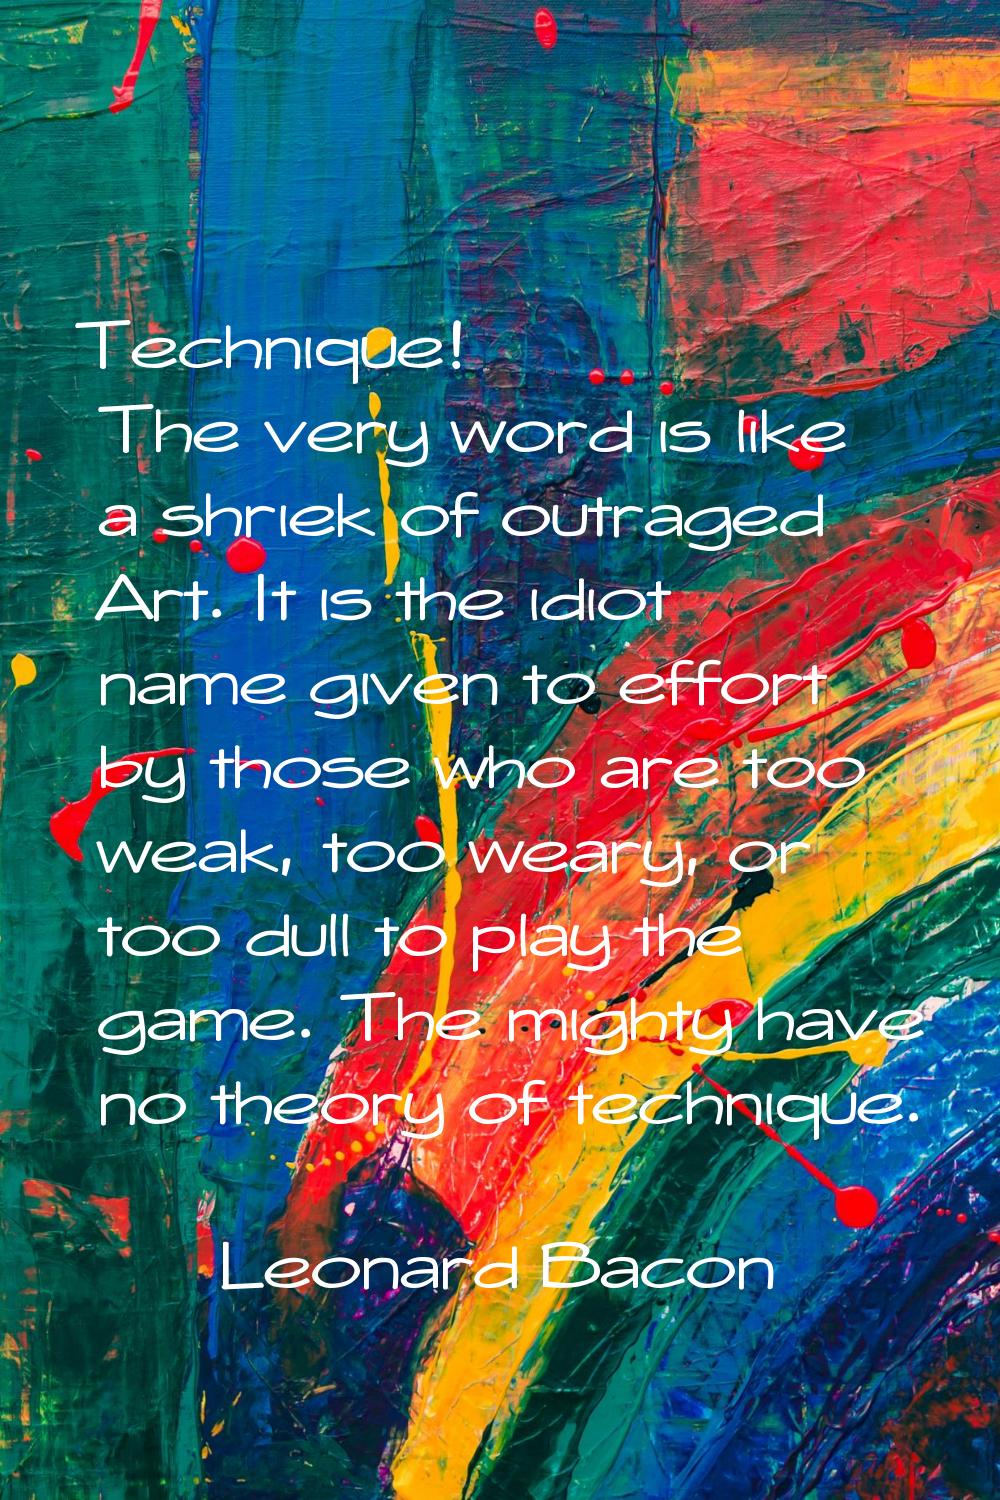 Technique! The very word is like a shriek of outraged Art. It is the idiot name given to effort by 